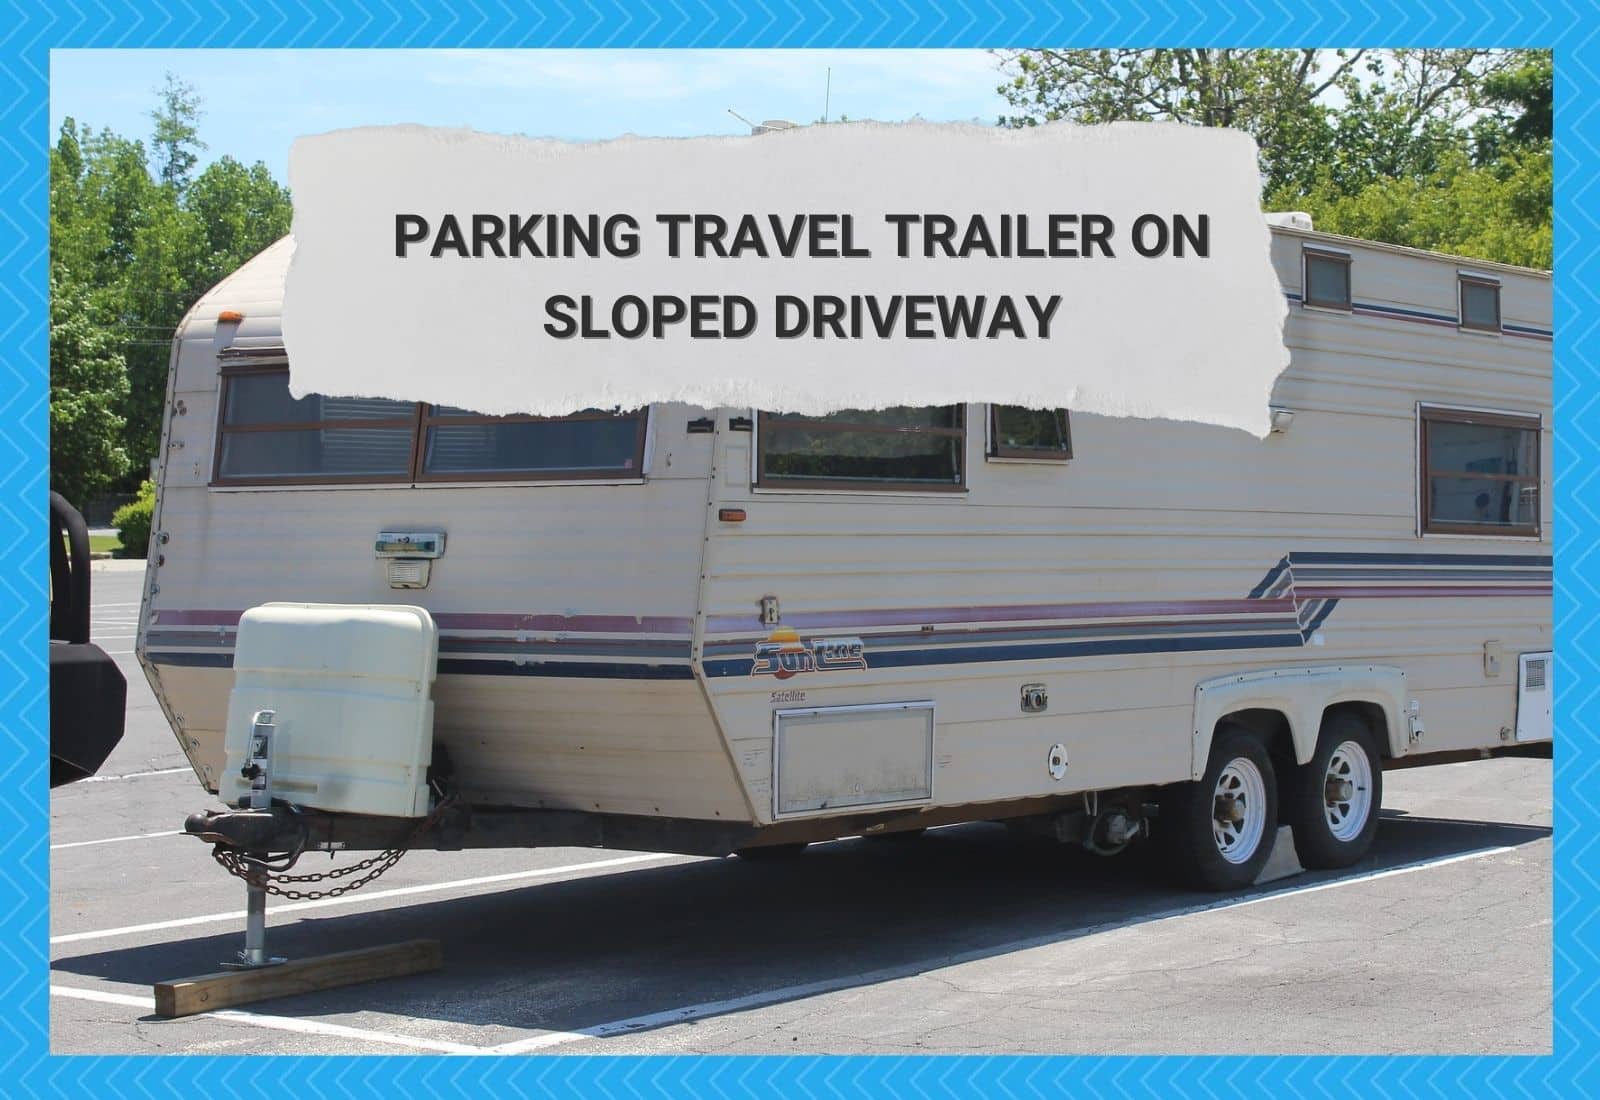 Parking Travel Trailer On Sloped Driveway